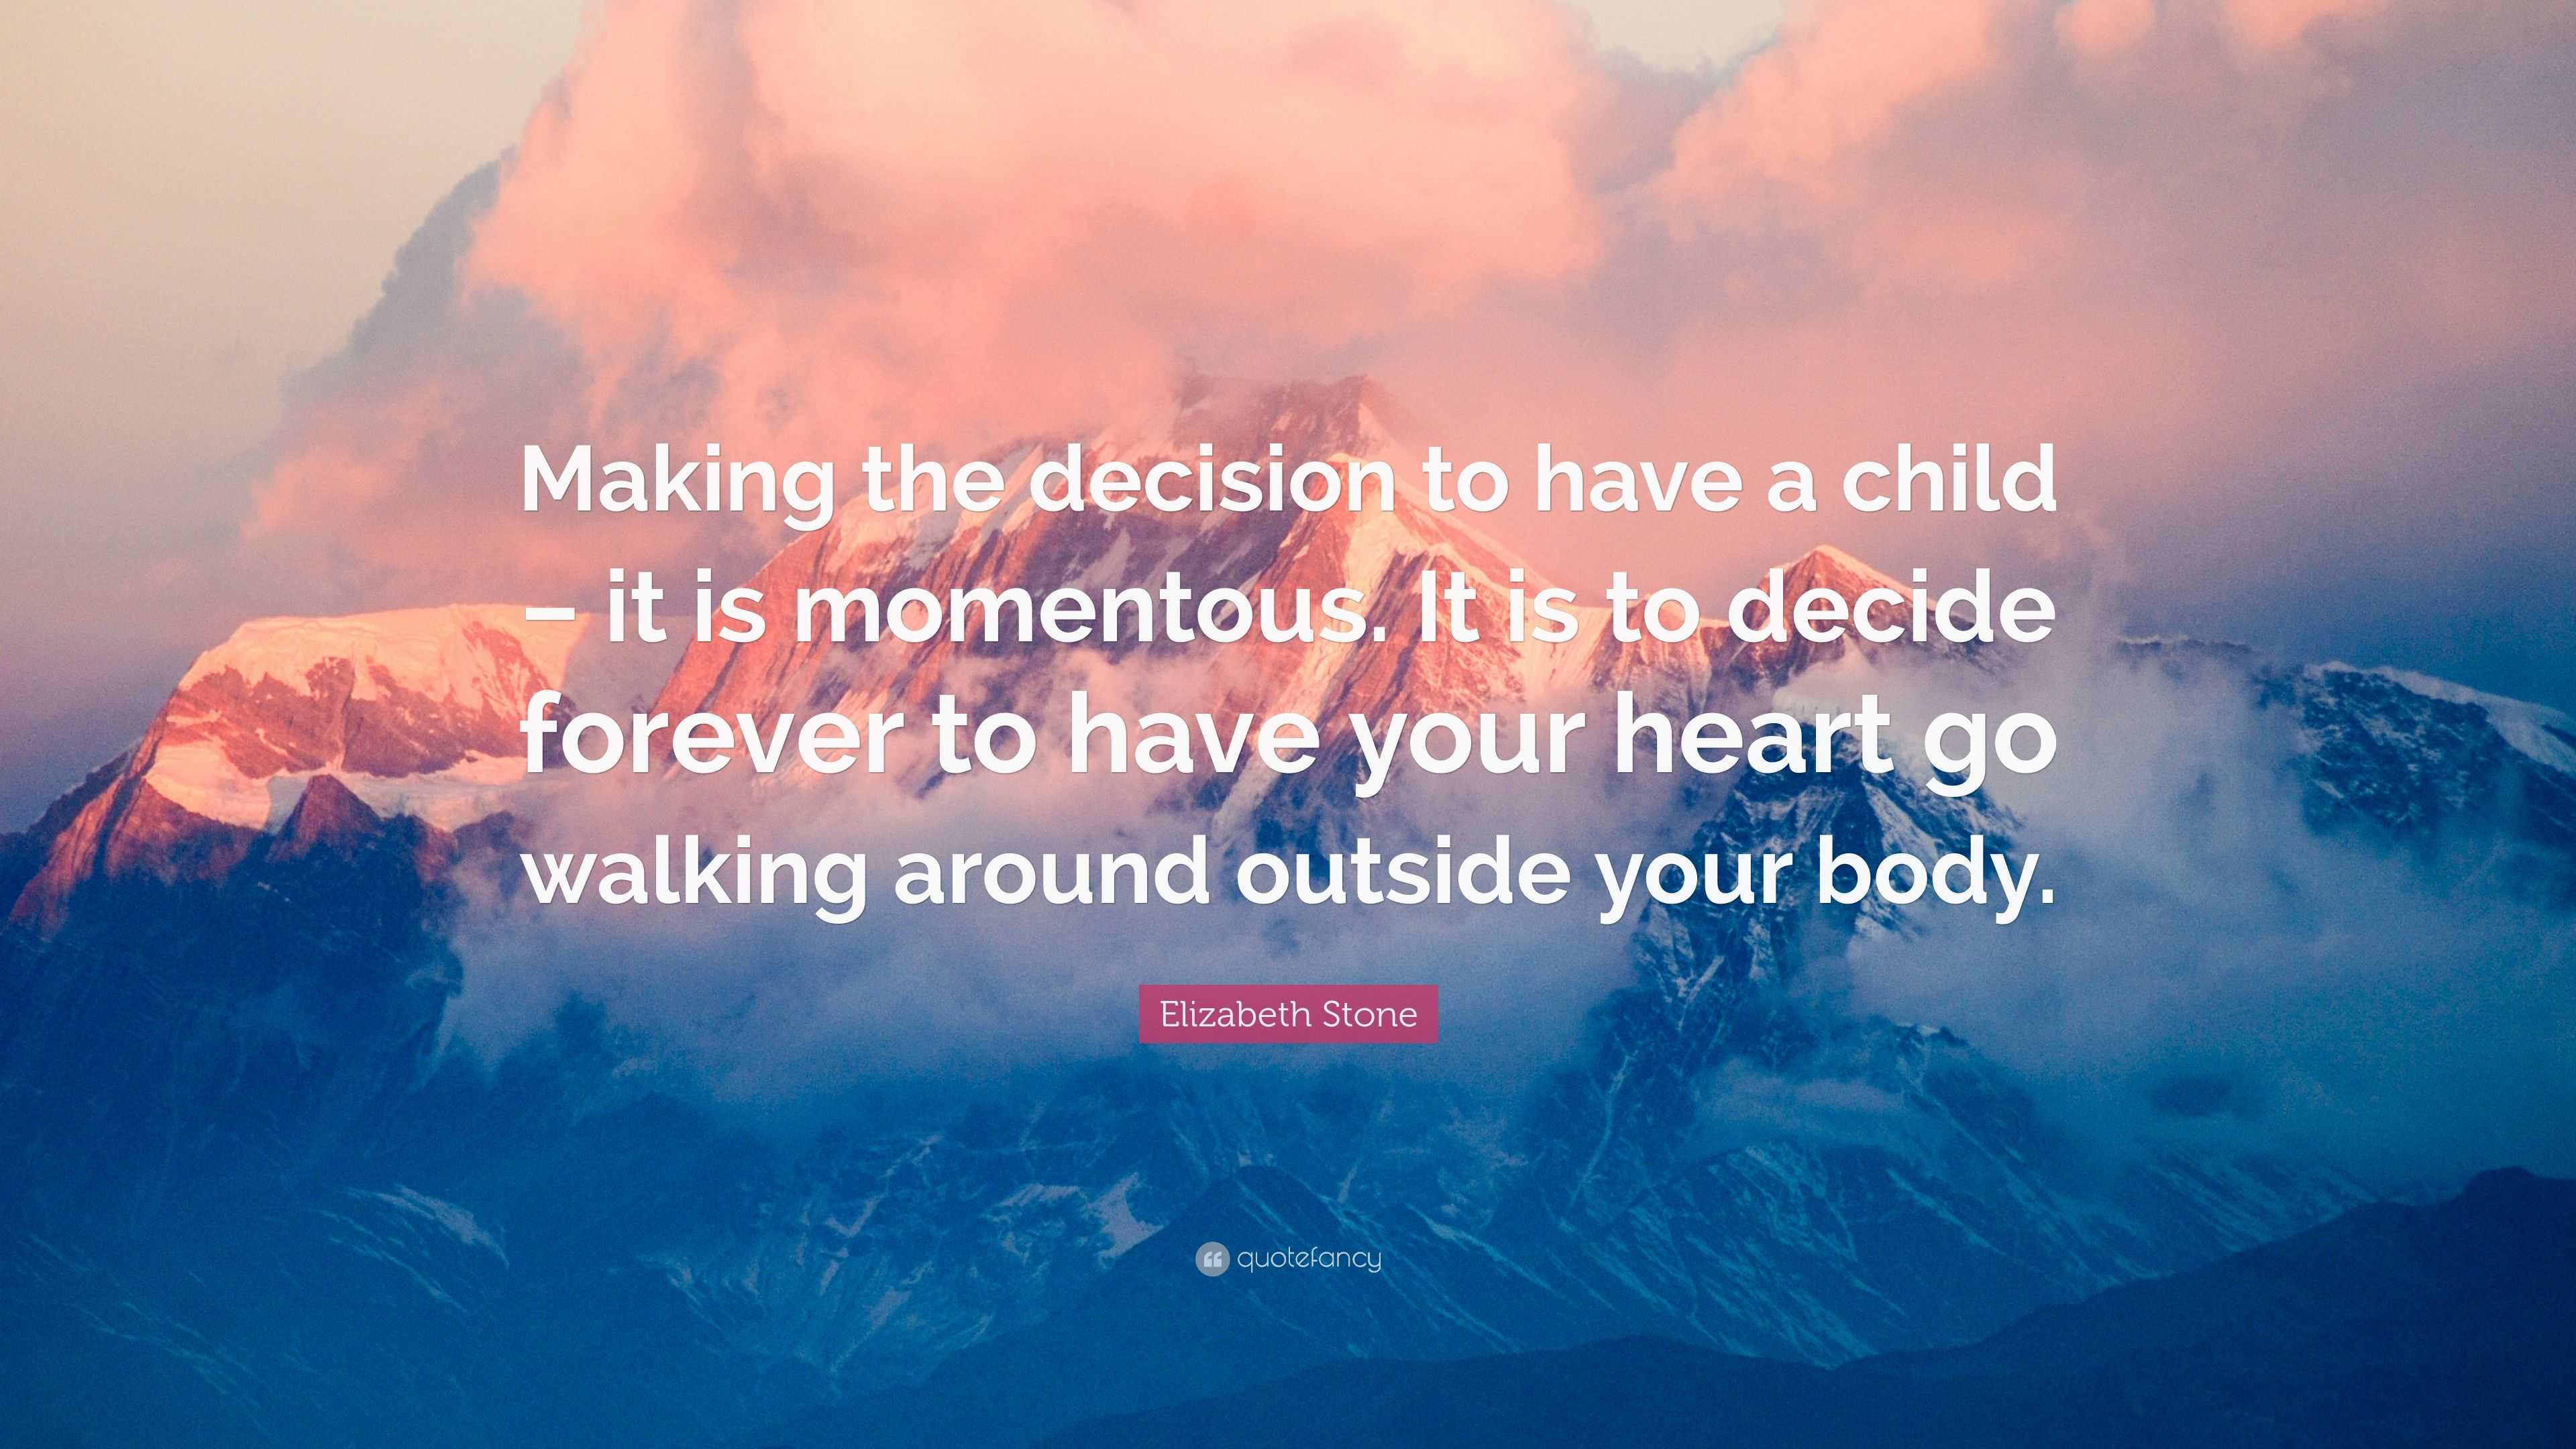 Elizabeth Stone Quote Making The Decision To Have A Child It Is Momentous It Is To Decide Forever To Have Your Heart Go Walking Around Outs